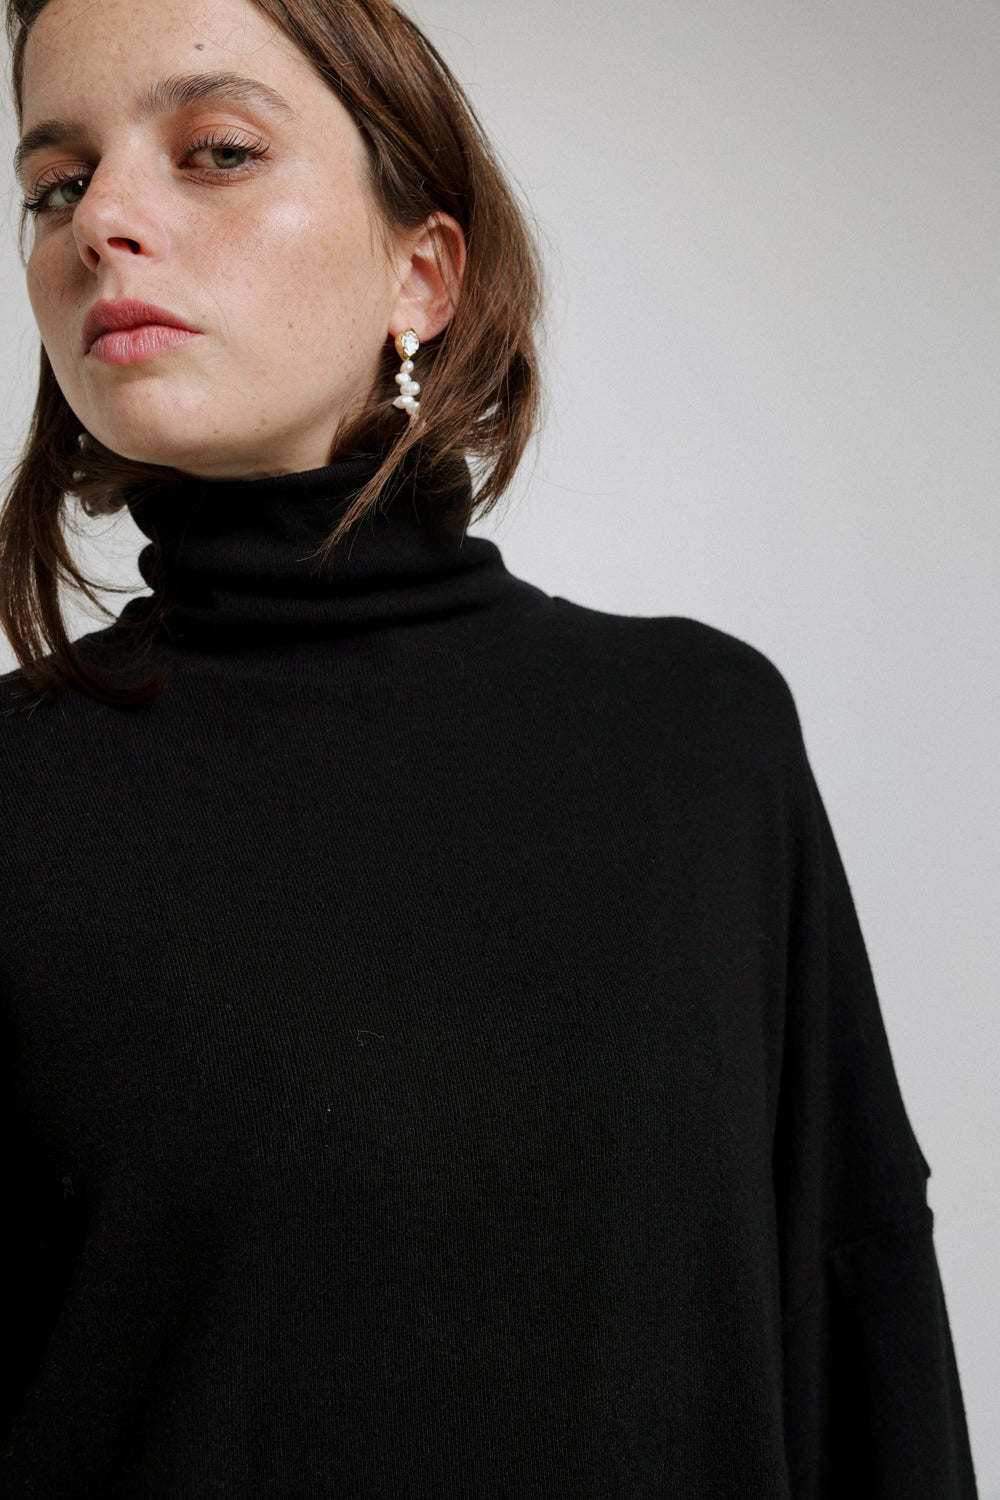 Wanted Black Oversized Jumper